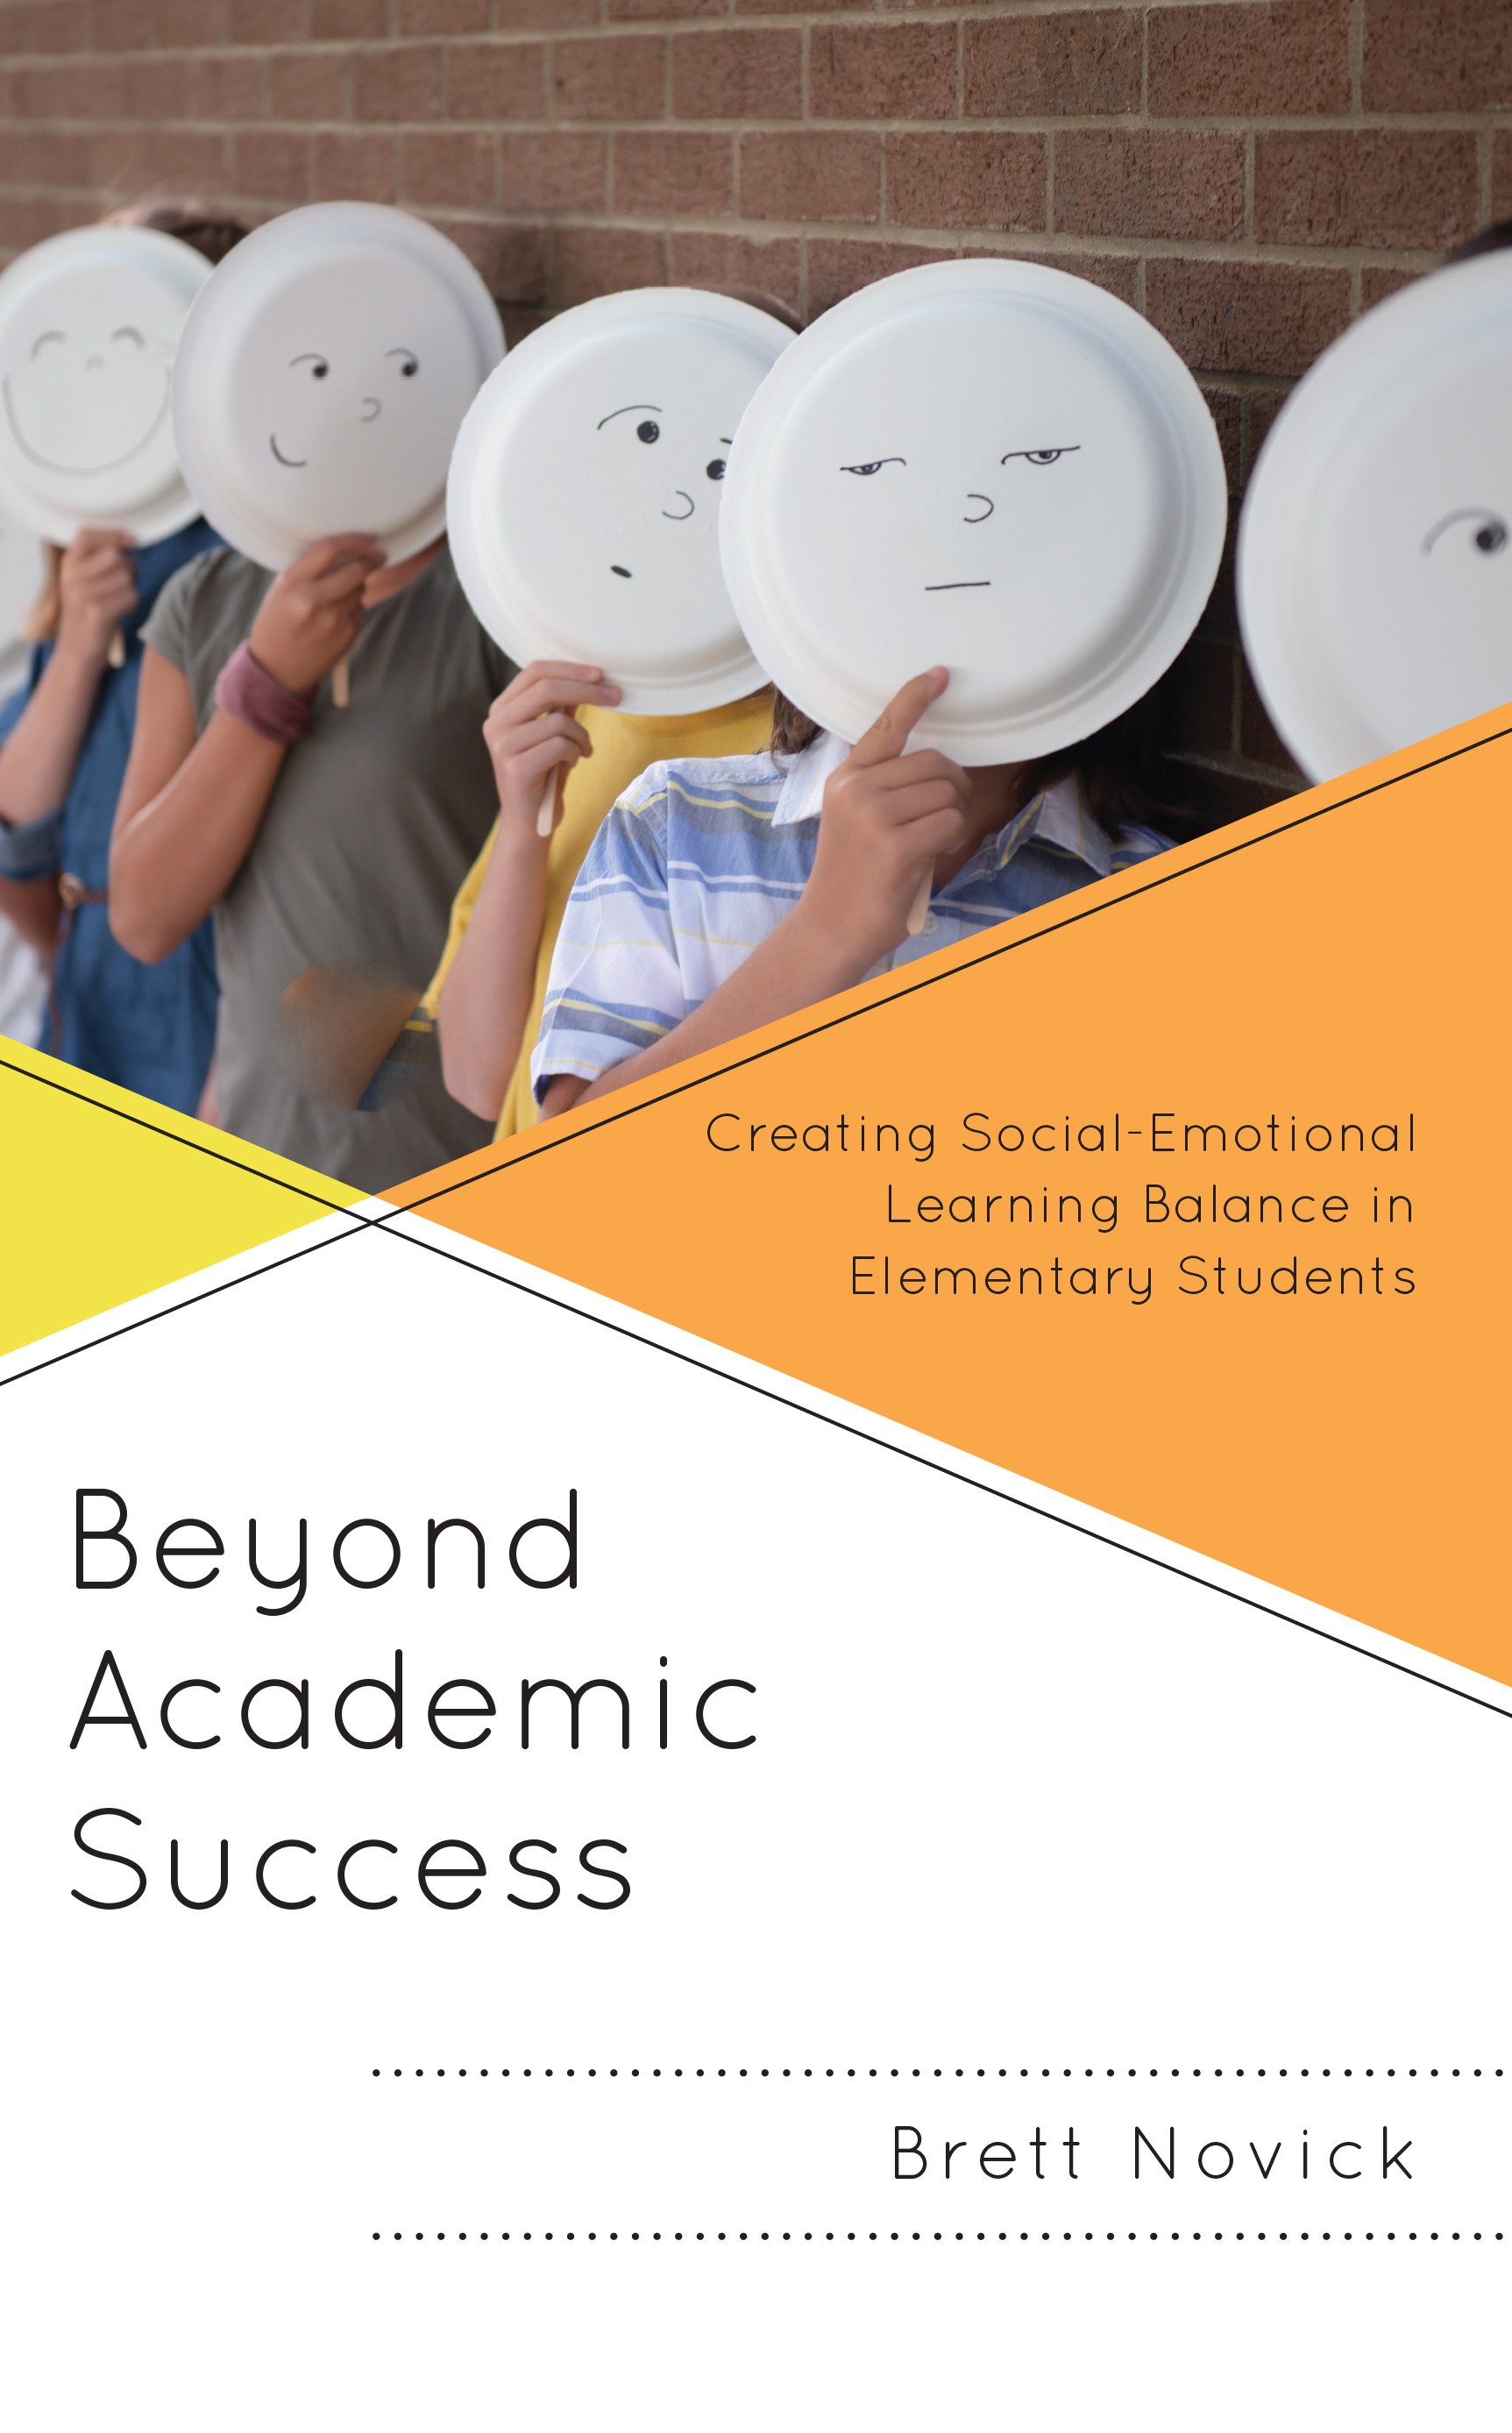 Beyond Academic Success: Creating Social-Emotional Learning Balance in Elementary Students